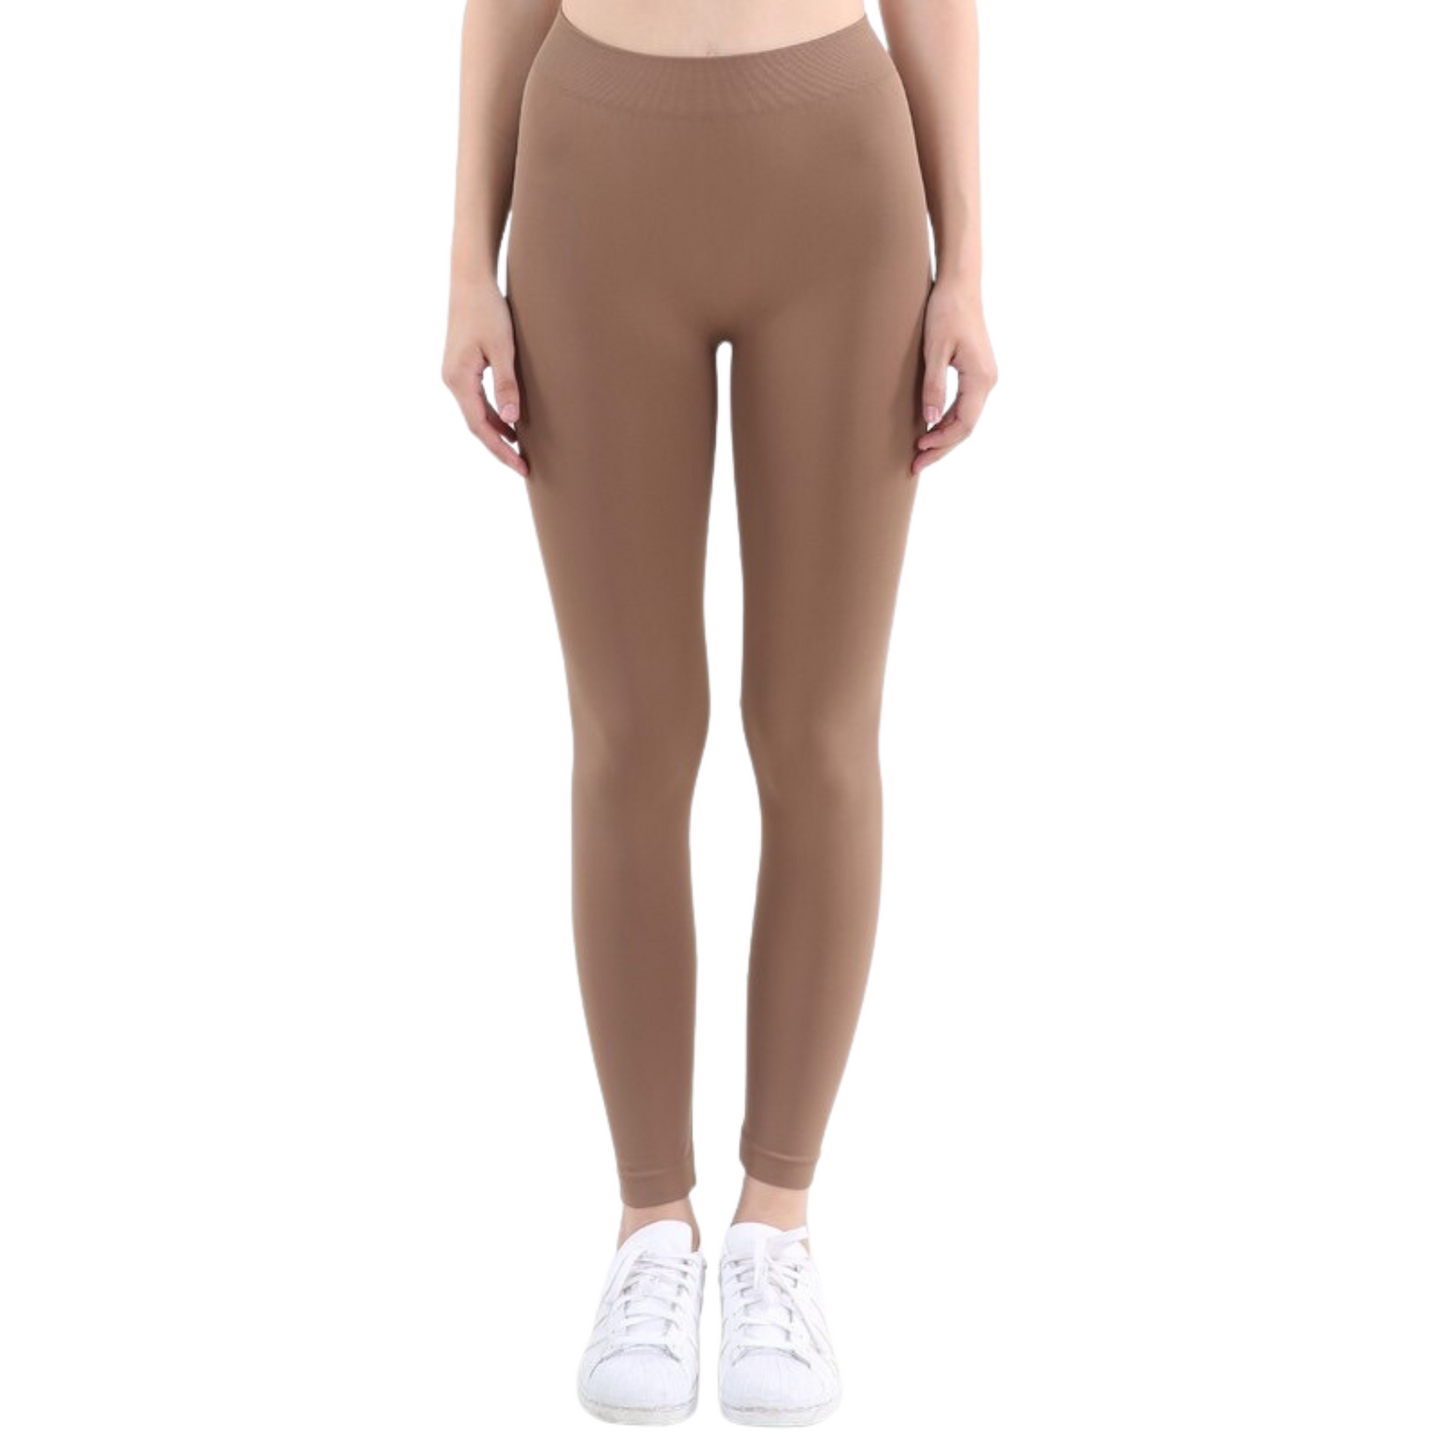 Taupe colored ankle length leggings